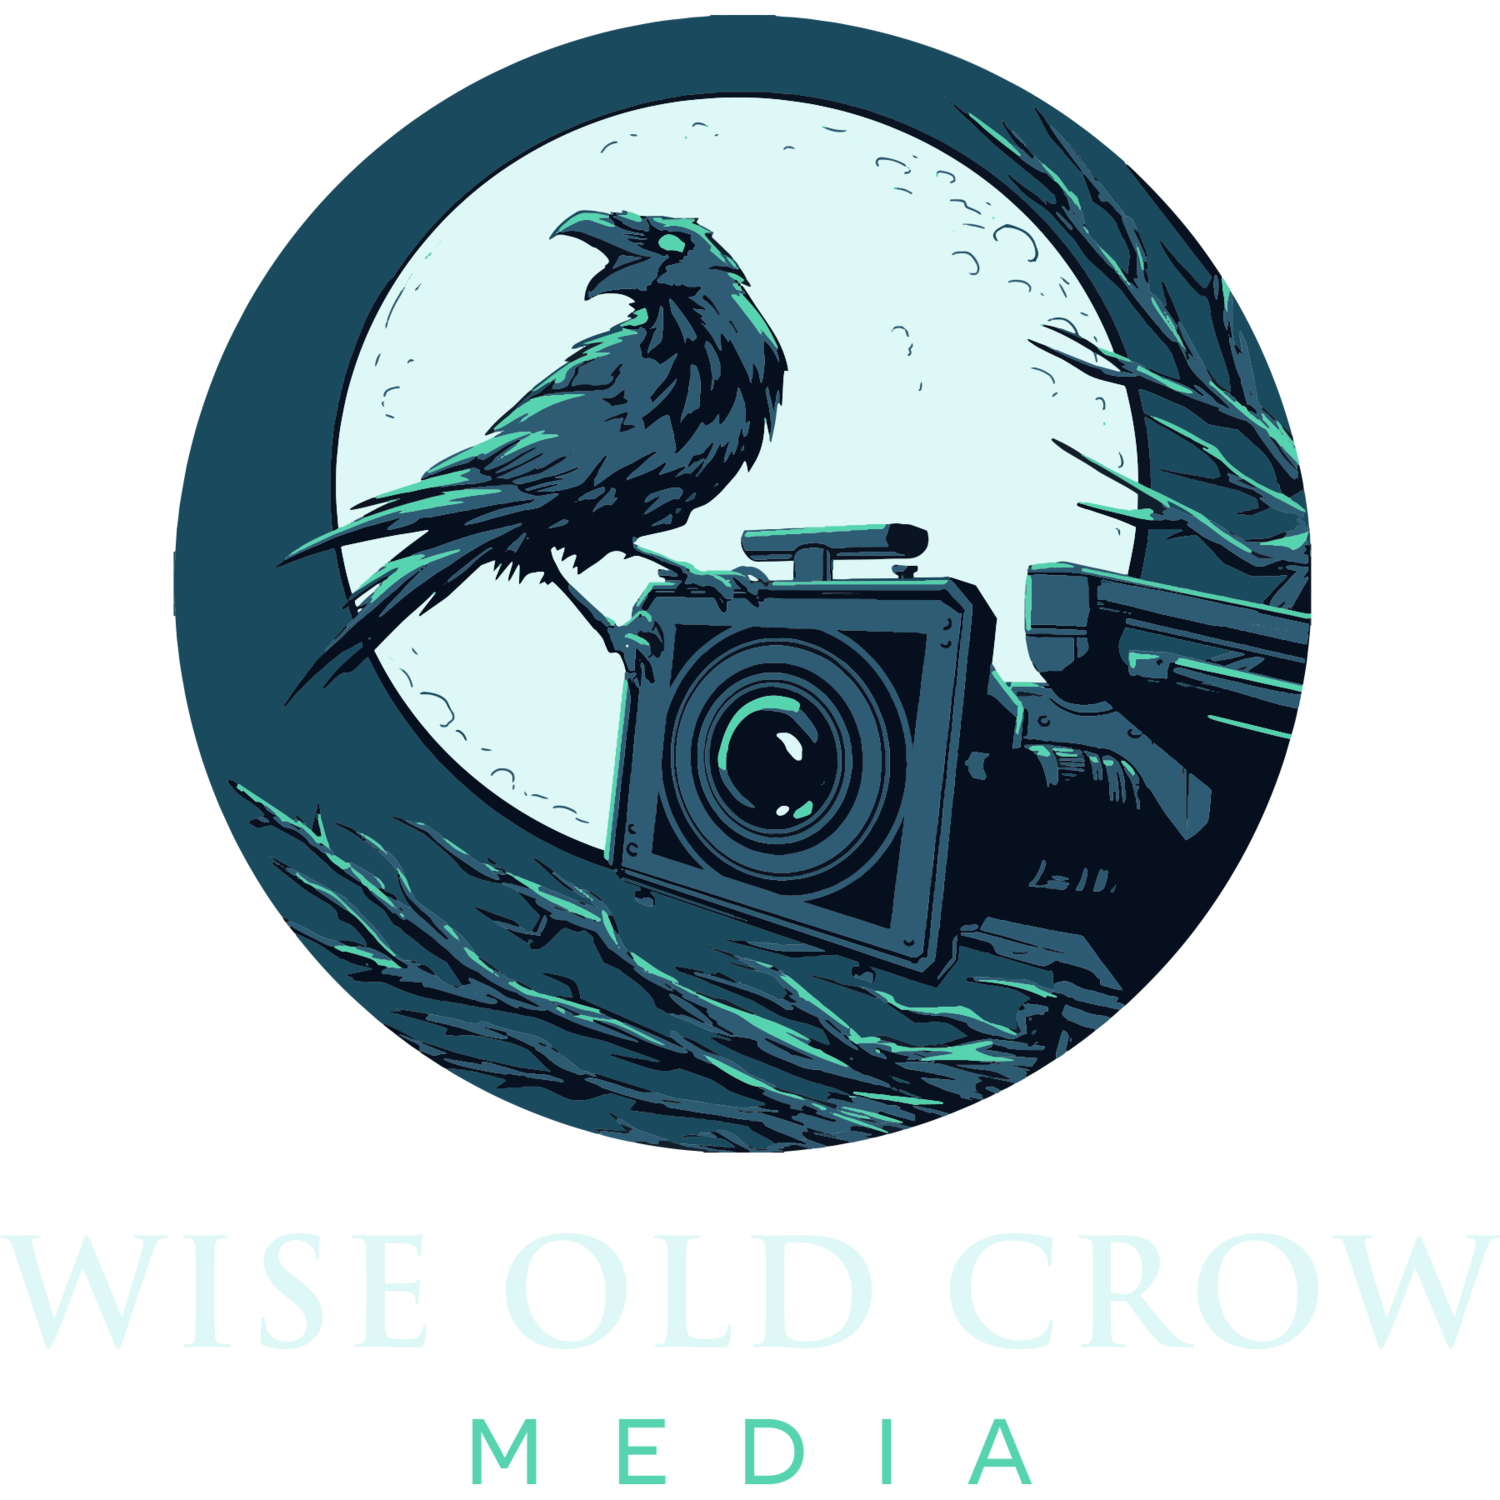 Wise Old Crow Media